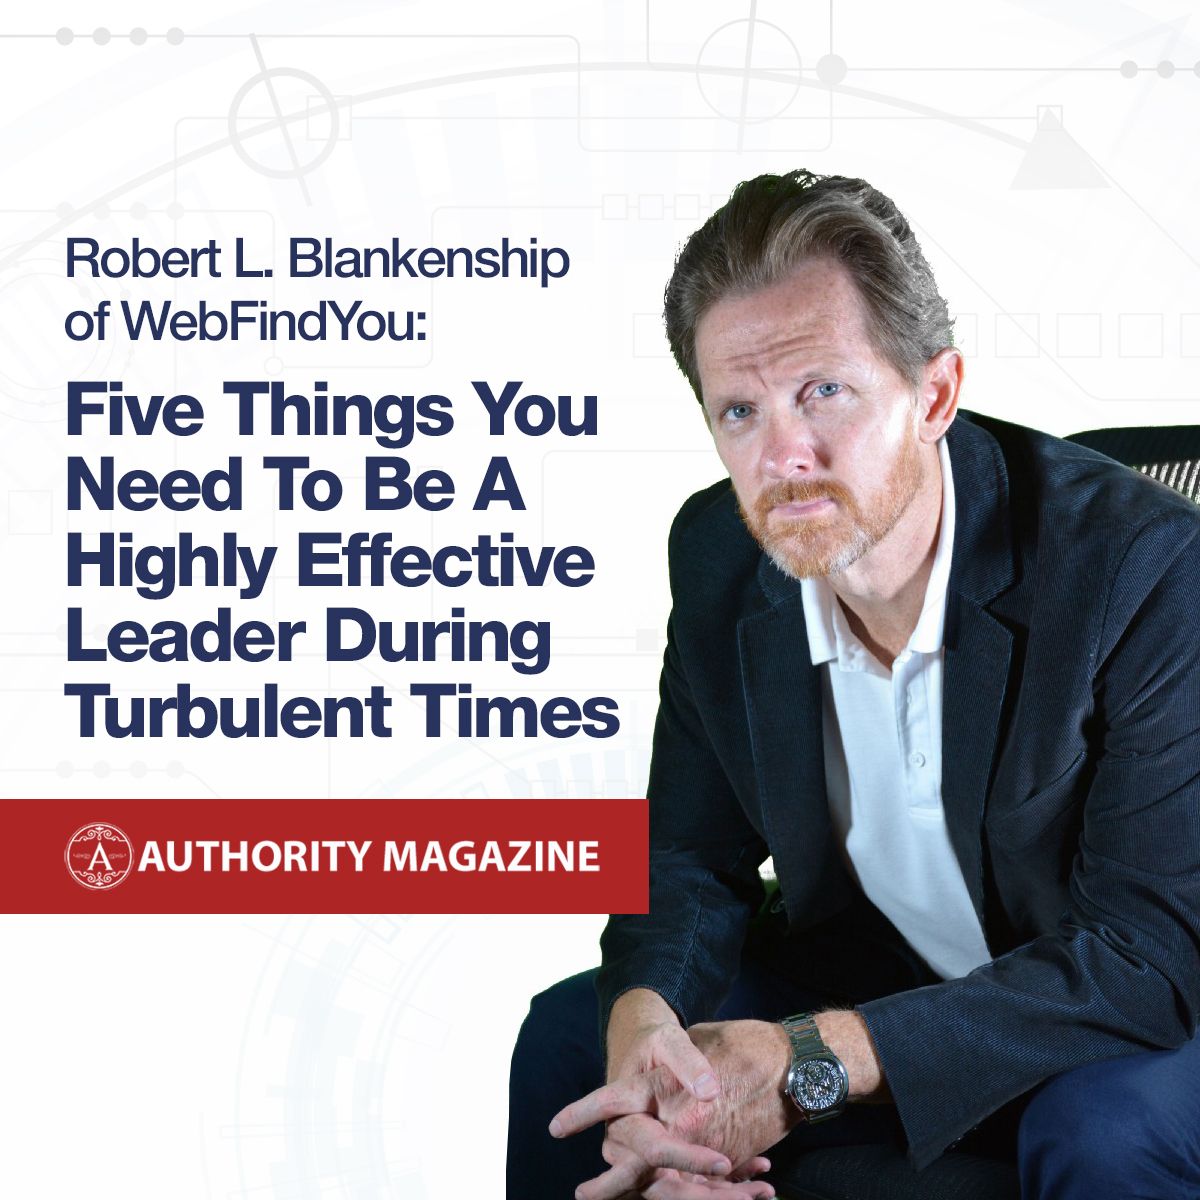 Five Things You Need To Be A Highly Effective Leader During Turbulent Times